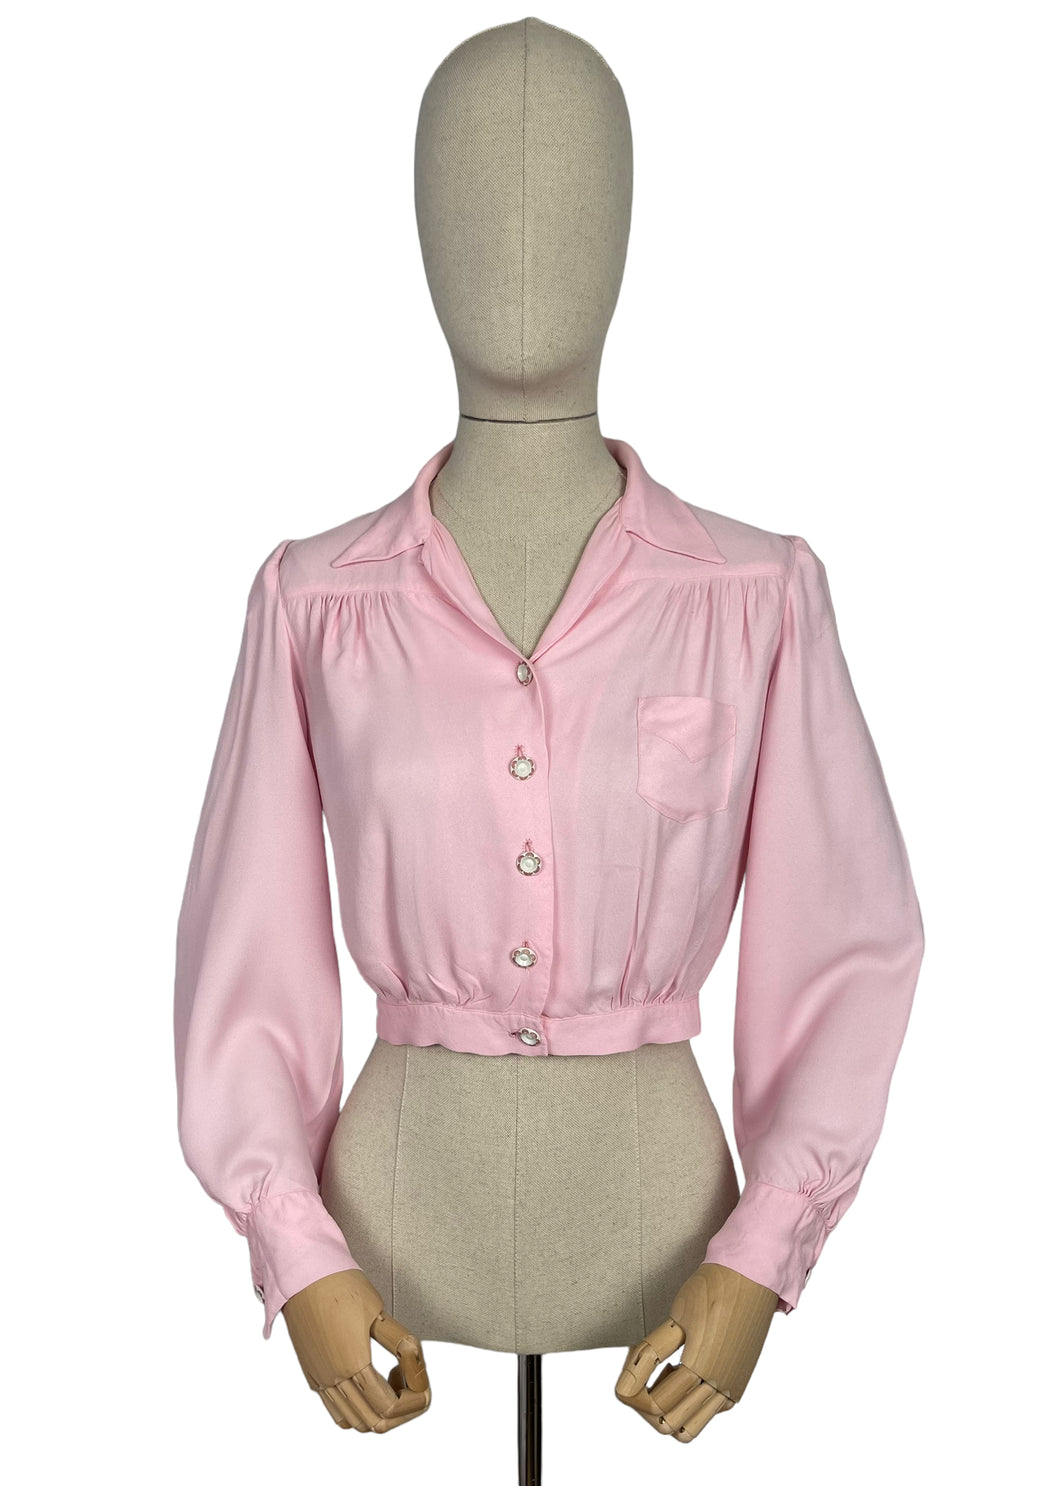 Original 1940's Pale Pink Long Sleeved Blouse with Neat Collar - Bust 34 35